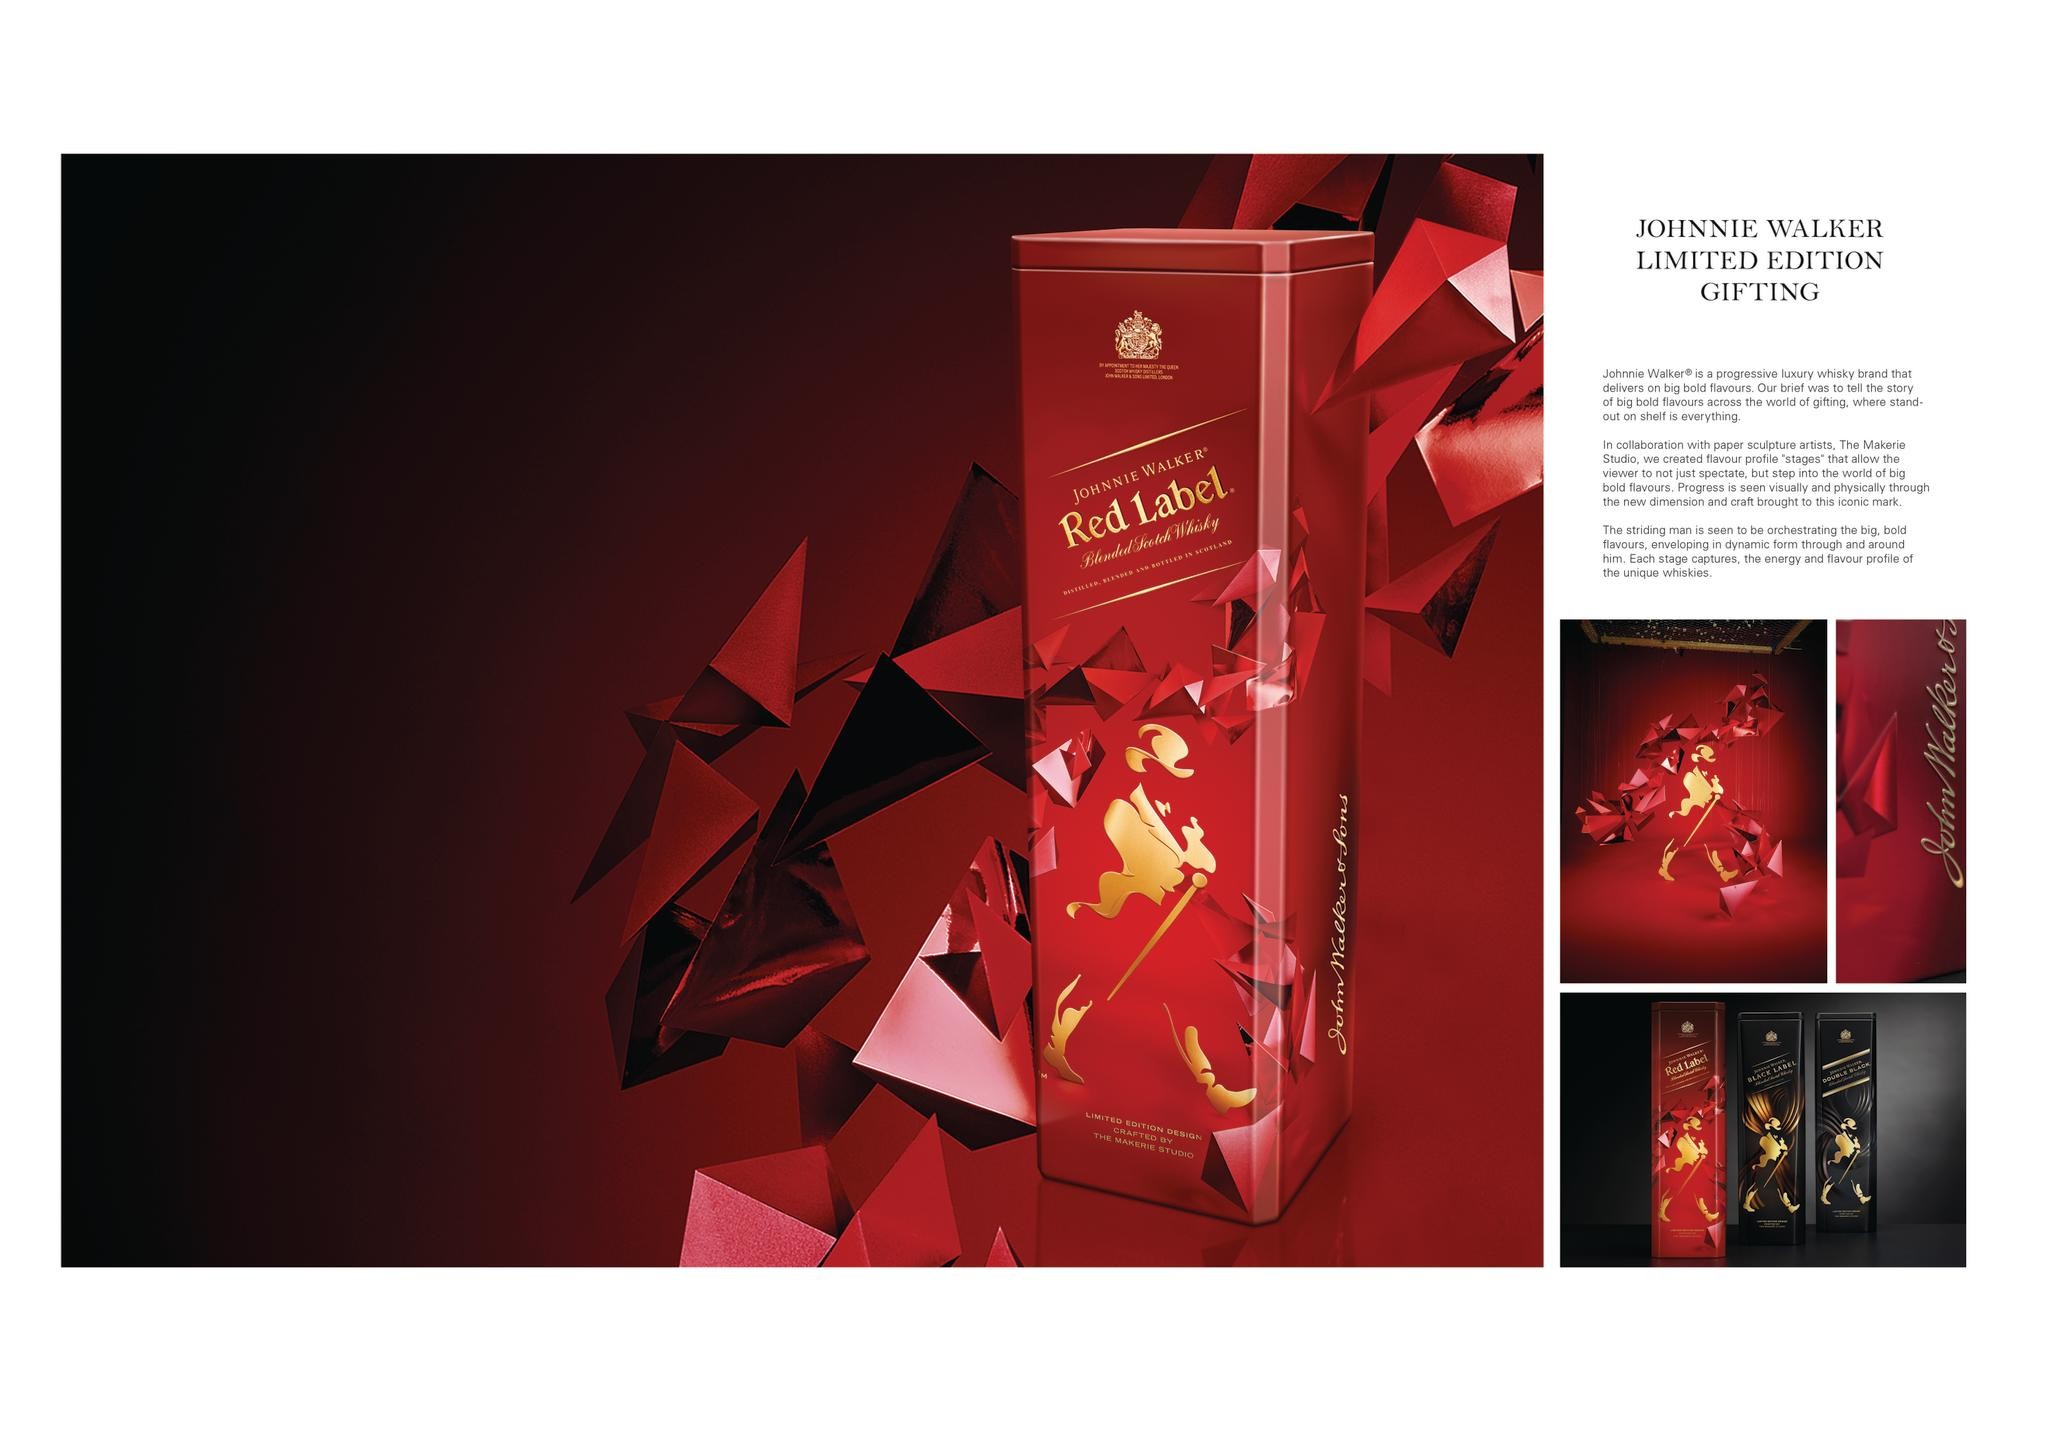 JOHNNIE WALKER LIMITED EDITION GIFTING